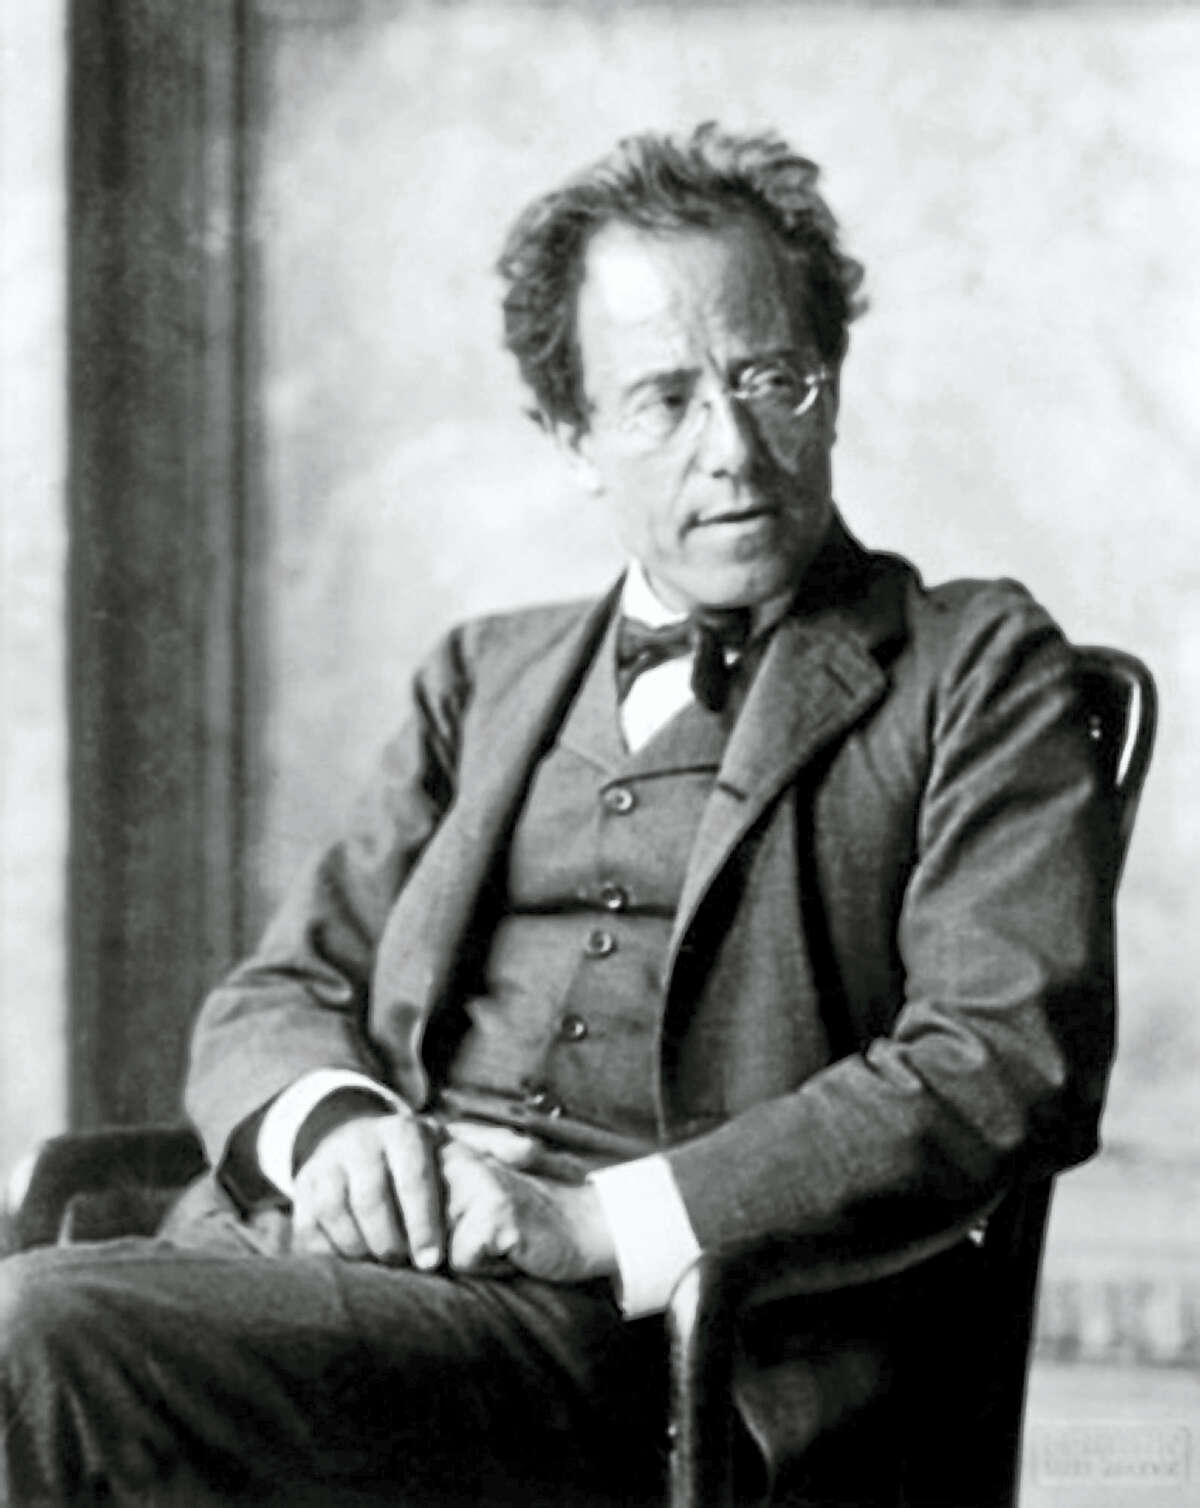 A 1907 portrait of Gustav Mahler, four years before his death at age 51.